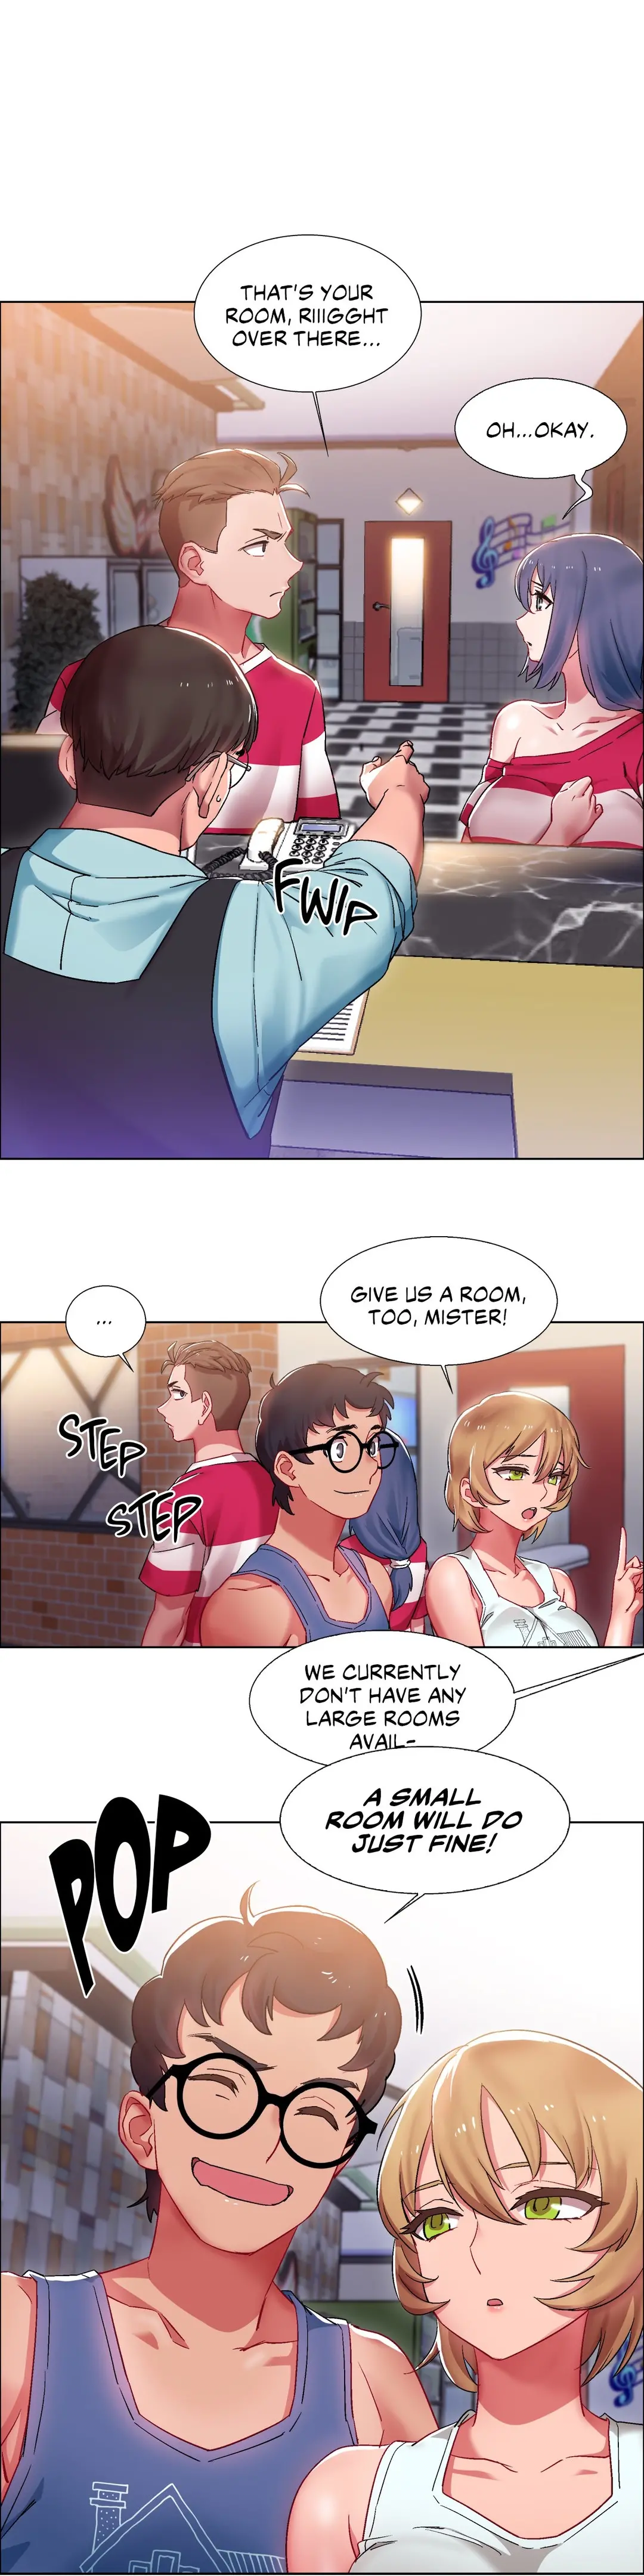 Rental Girls - Chapter 17 Page 4